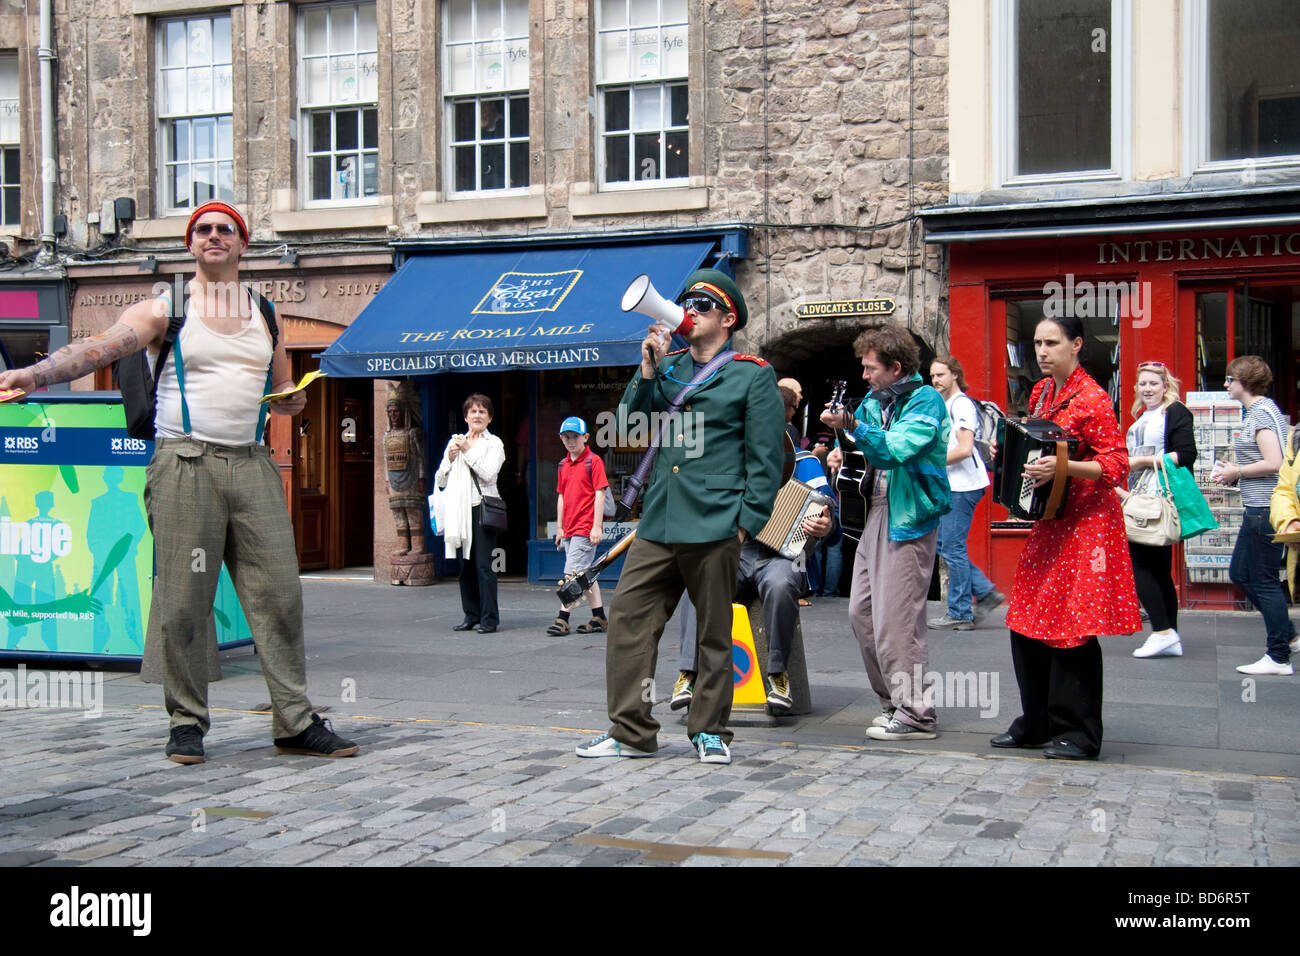 A man singing into a megaphone as part of a street act performing in Edinburgh's Fringe Festival 2009 Stock Photo